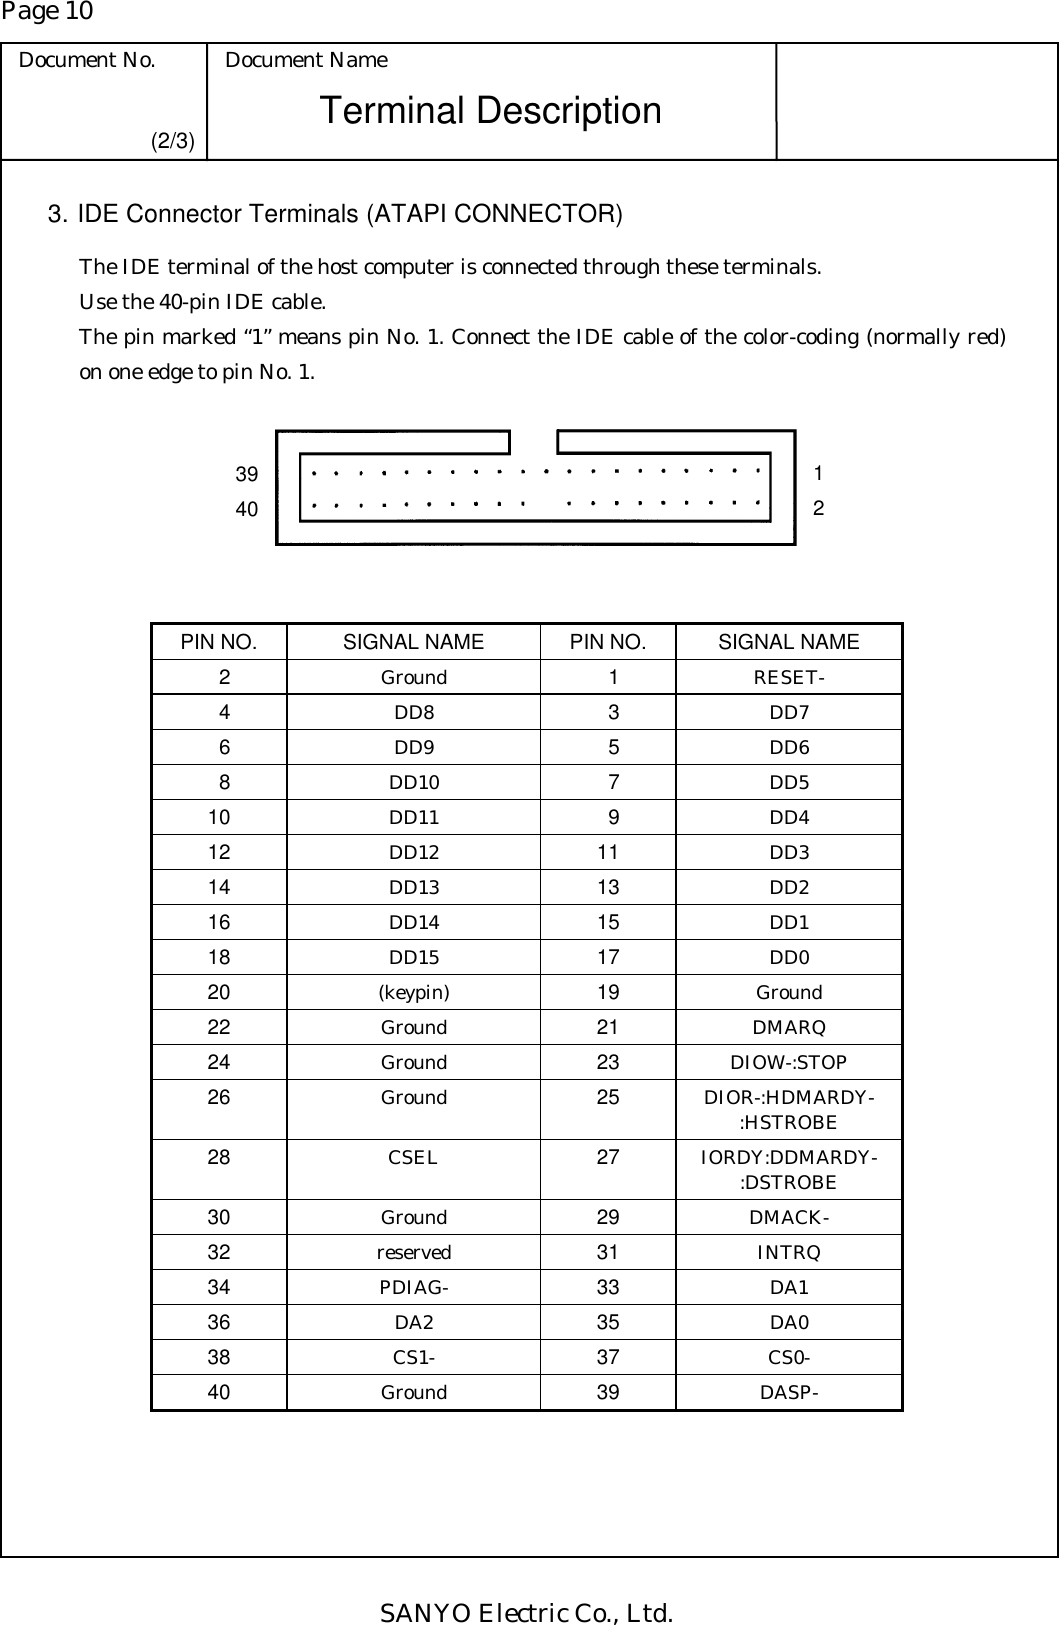 Page 10 Document No.  Document Name SANYO Electric Co., Ltd. Terminal Description (2/3) 3. IDE Connector Terminals (ATAPI CONNECTOR) The IDE terminal of the host computer is connected through these terminals. Use the 40-pin IDE cable. The pin marked “1” means pin No. 1. Connect the IDE cable of the color-coding (normally red) on one edge to pin No. 1.        PIN NO.  SIGNAL NAME  PIN NO.  SIGNAL NAME 2  Ground  1  RESET- 4  DD8  3  DD7 6  DD9  5  DD6 8  DD10  7  DD5 10  DD11  9  DD4 12  DD12  11  DD3 14  DD13  13  DD2 16  DD14  15  DD1 18  DD15  17  DD0 20  (keypin)  19  Ground 22  Ground  21  DMARQ 24  Ground  23  DIOW-:STOP 26  Ground  25  DIOR-:HDMARDY- :HSTROBE 28  CSEL  27  IORDY:DDMARDY- :DSTROBE 30  Ground  29  DMACK- 32  reserved  31  INTRQ 34  PDIAG-  33  DA1 36  DA2  35  DA0 38  CS1-  37  CS0- 40  Ground  39  DASP- 39 40 1 2 